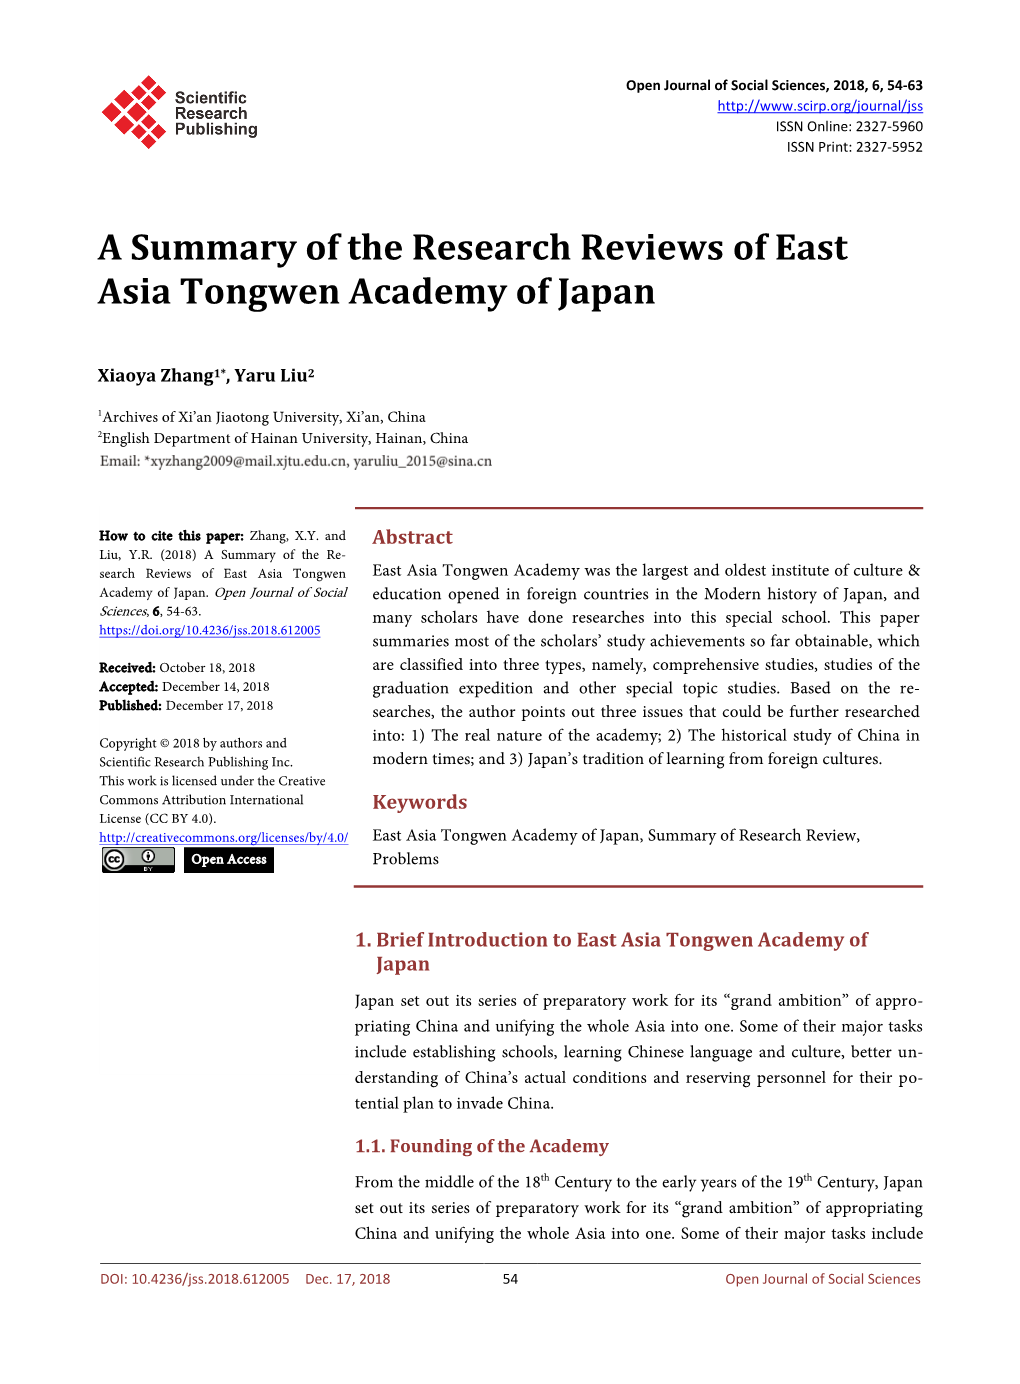 A Summary of the Research Reviews of East Asia Tongwen Academy of Japan